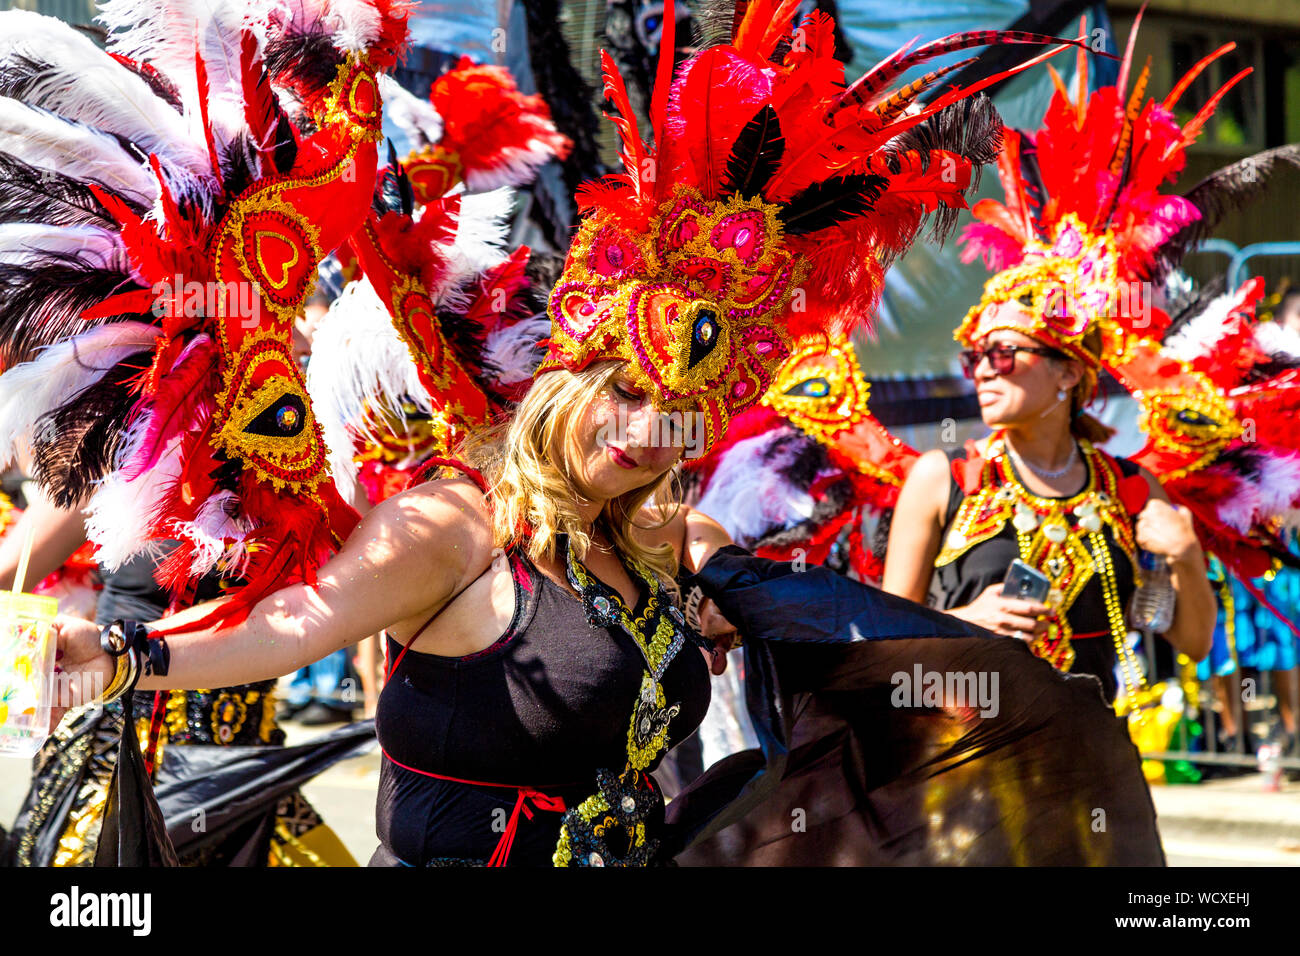 26 August 2019 - Woman in costume and headdress dancing in the parade, Notting Hill Carnival on a hot Bank Holiday Monday, London, UK Stock Photo